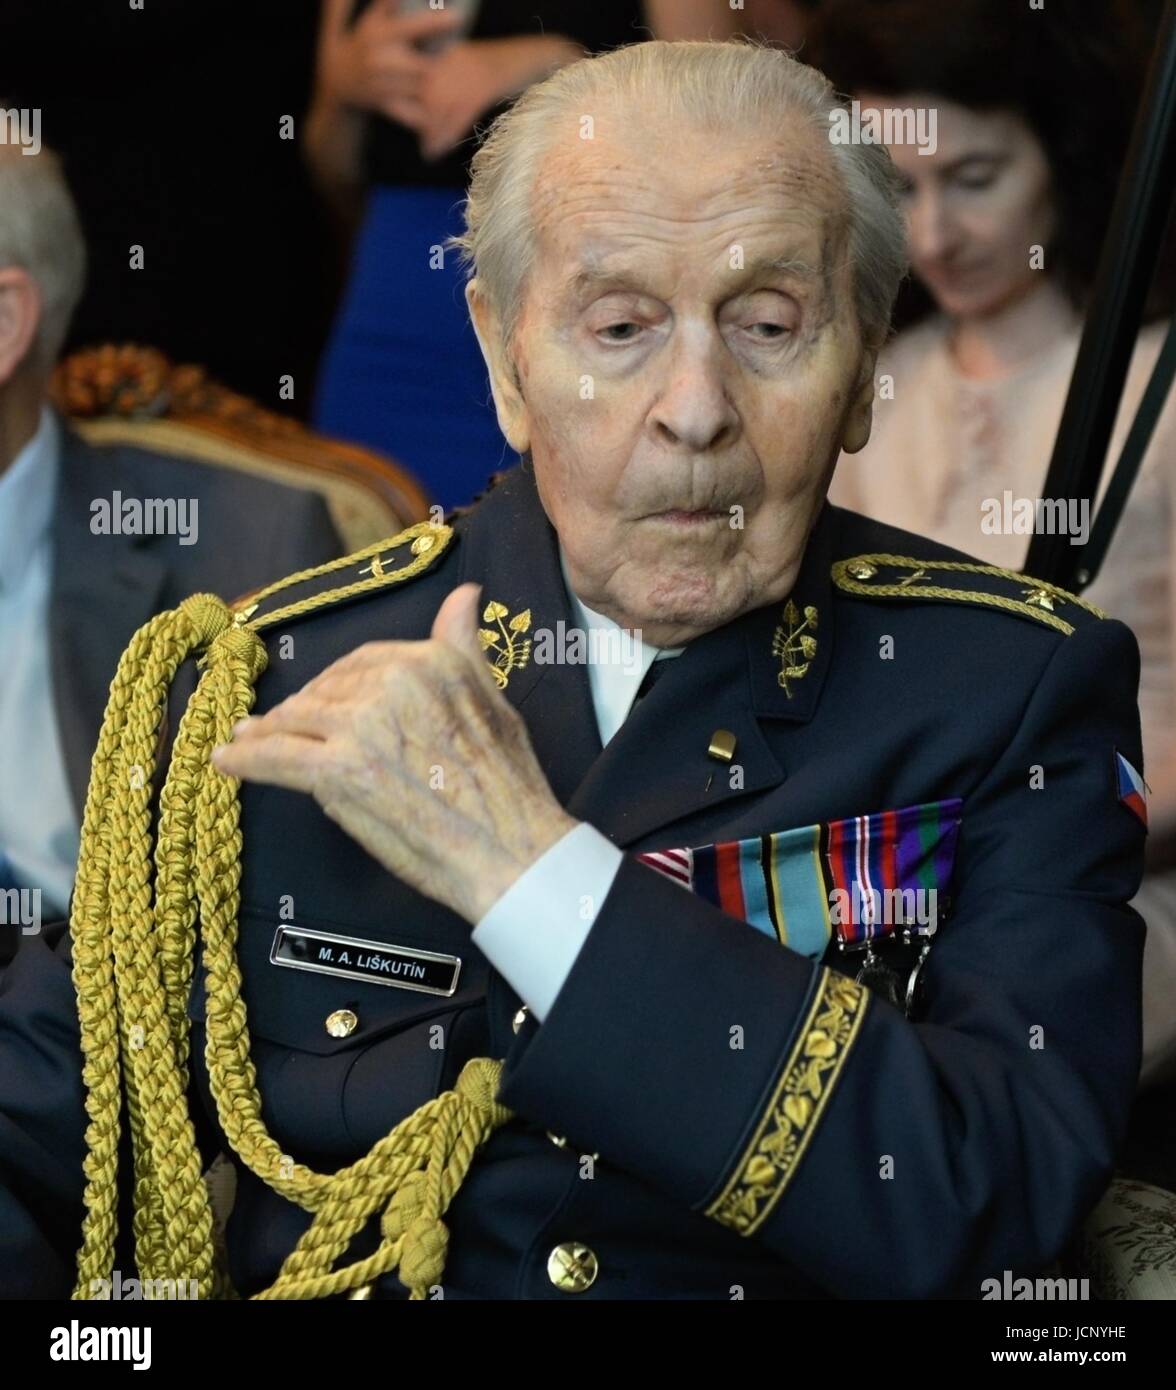 London, UK. 16th June, 2017. President Milos Zeman (not pictured) gave medals to several Czech and Slovak veterans who served in the RAF during World War Two at the Czech embassy in London today. He also gave a diploma on the promotion to the rank of general to Miroslav Liskutin (pictured), 97. Credit: Jakub Dospiva/CTK Photo/Alamy Live News Stock Photo